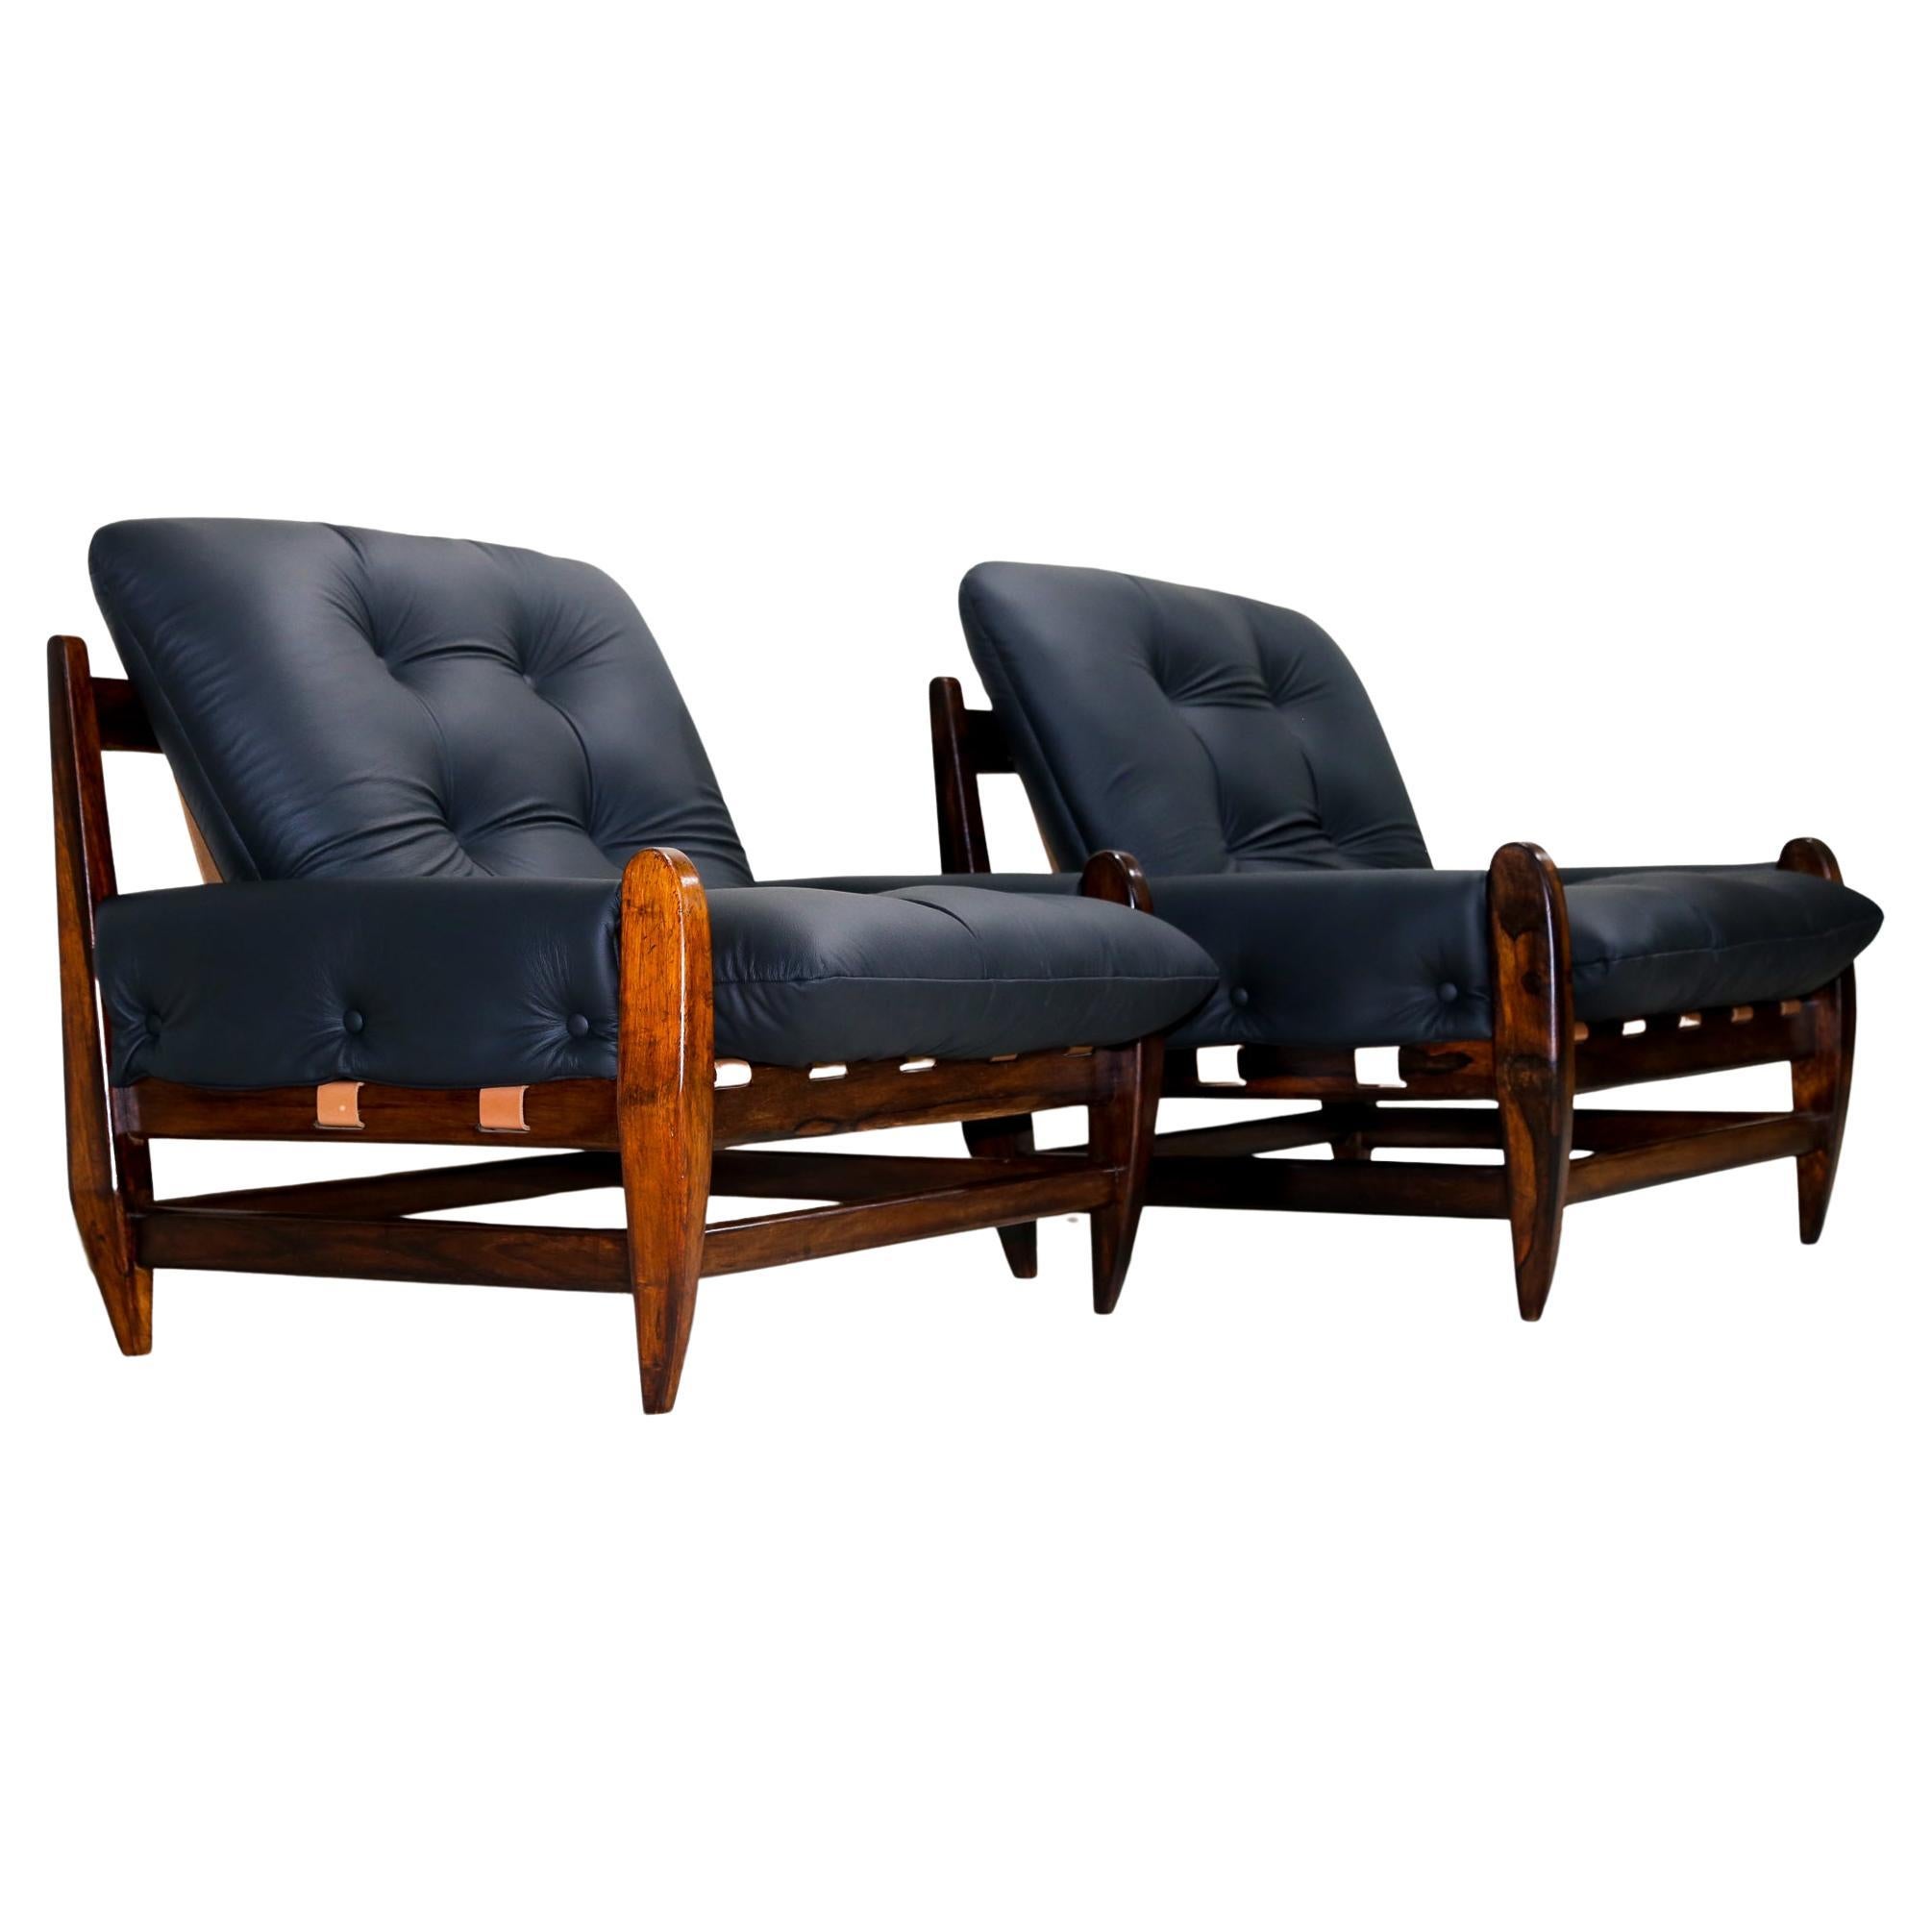 Brazilian Modern Armchairs in Hardwood & Black Leather, Jean Gillon, 1960 In Good Condition For Sale In New York, NY